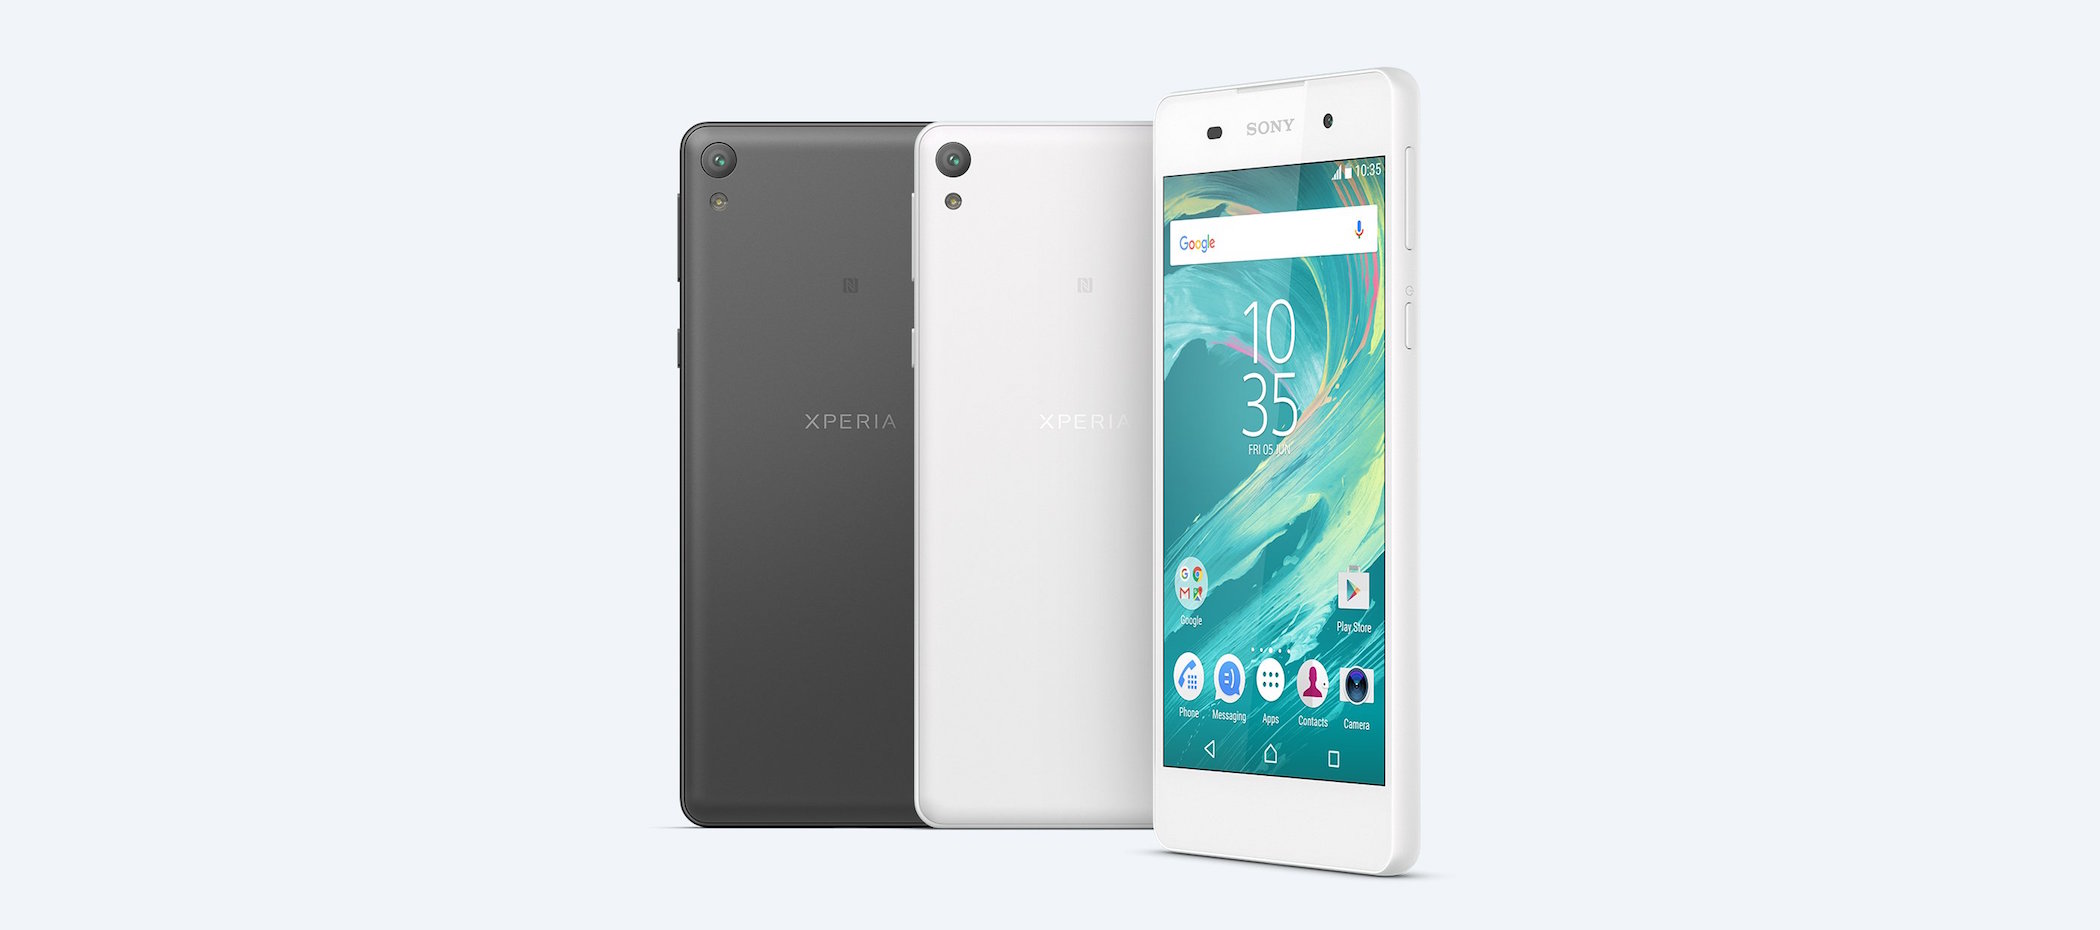 xperia-e5-the-power-to-do-what-you-want-desktop-1ef22833489a37c7ac2f61f752219db4.jpg